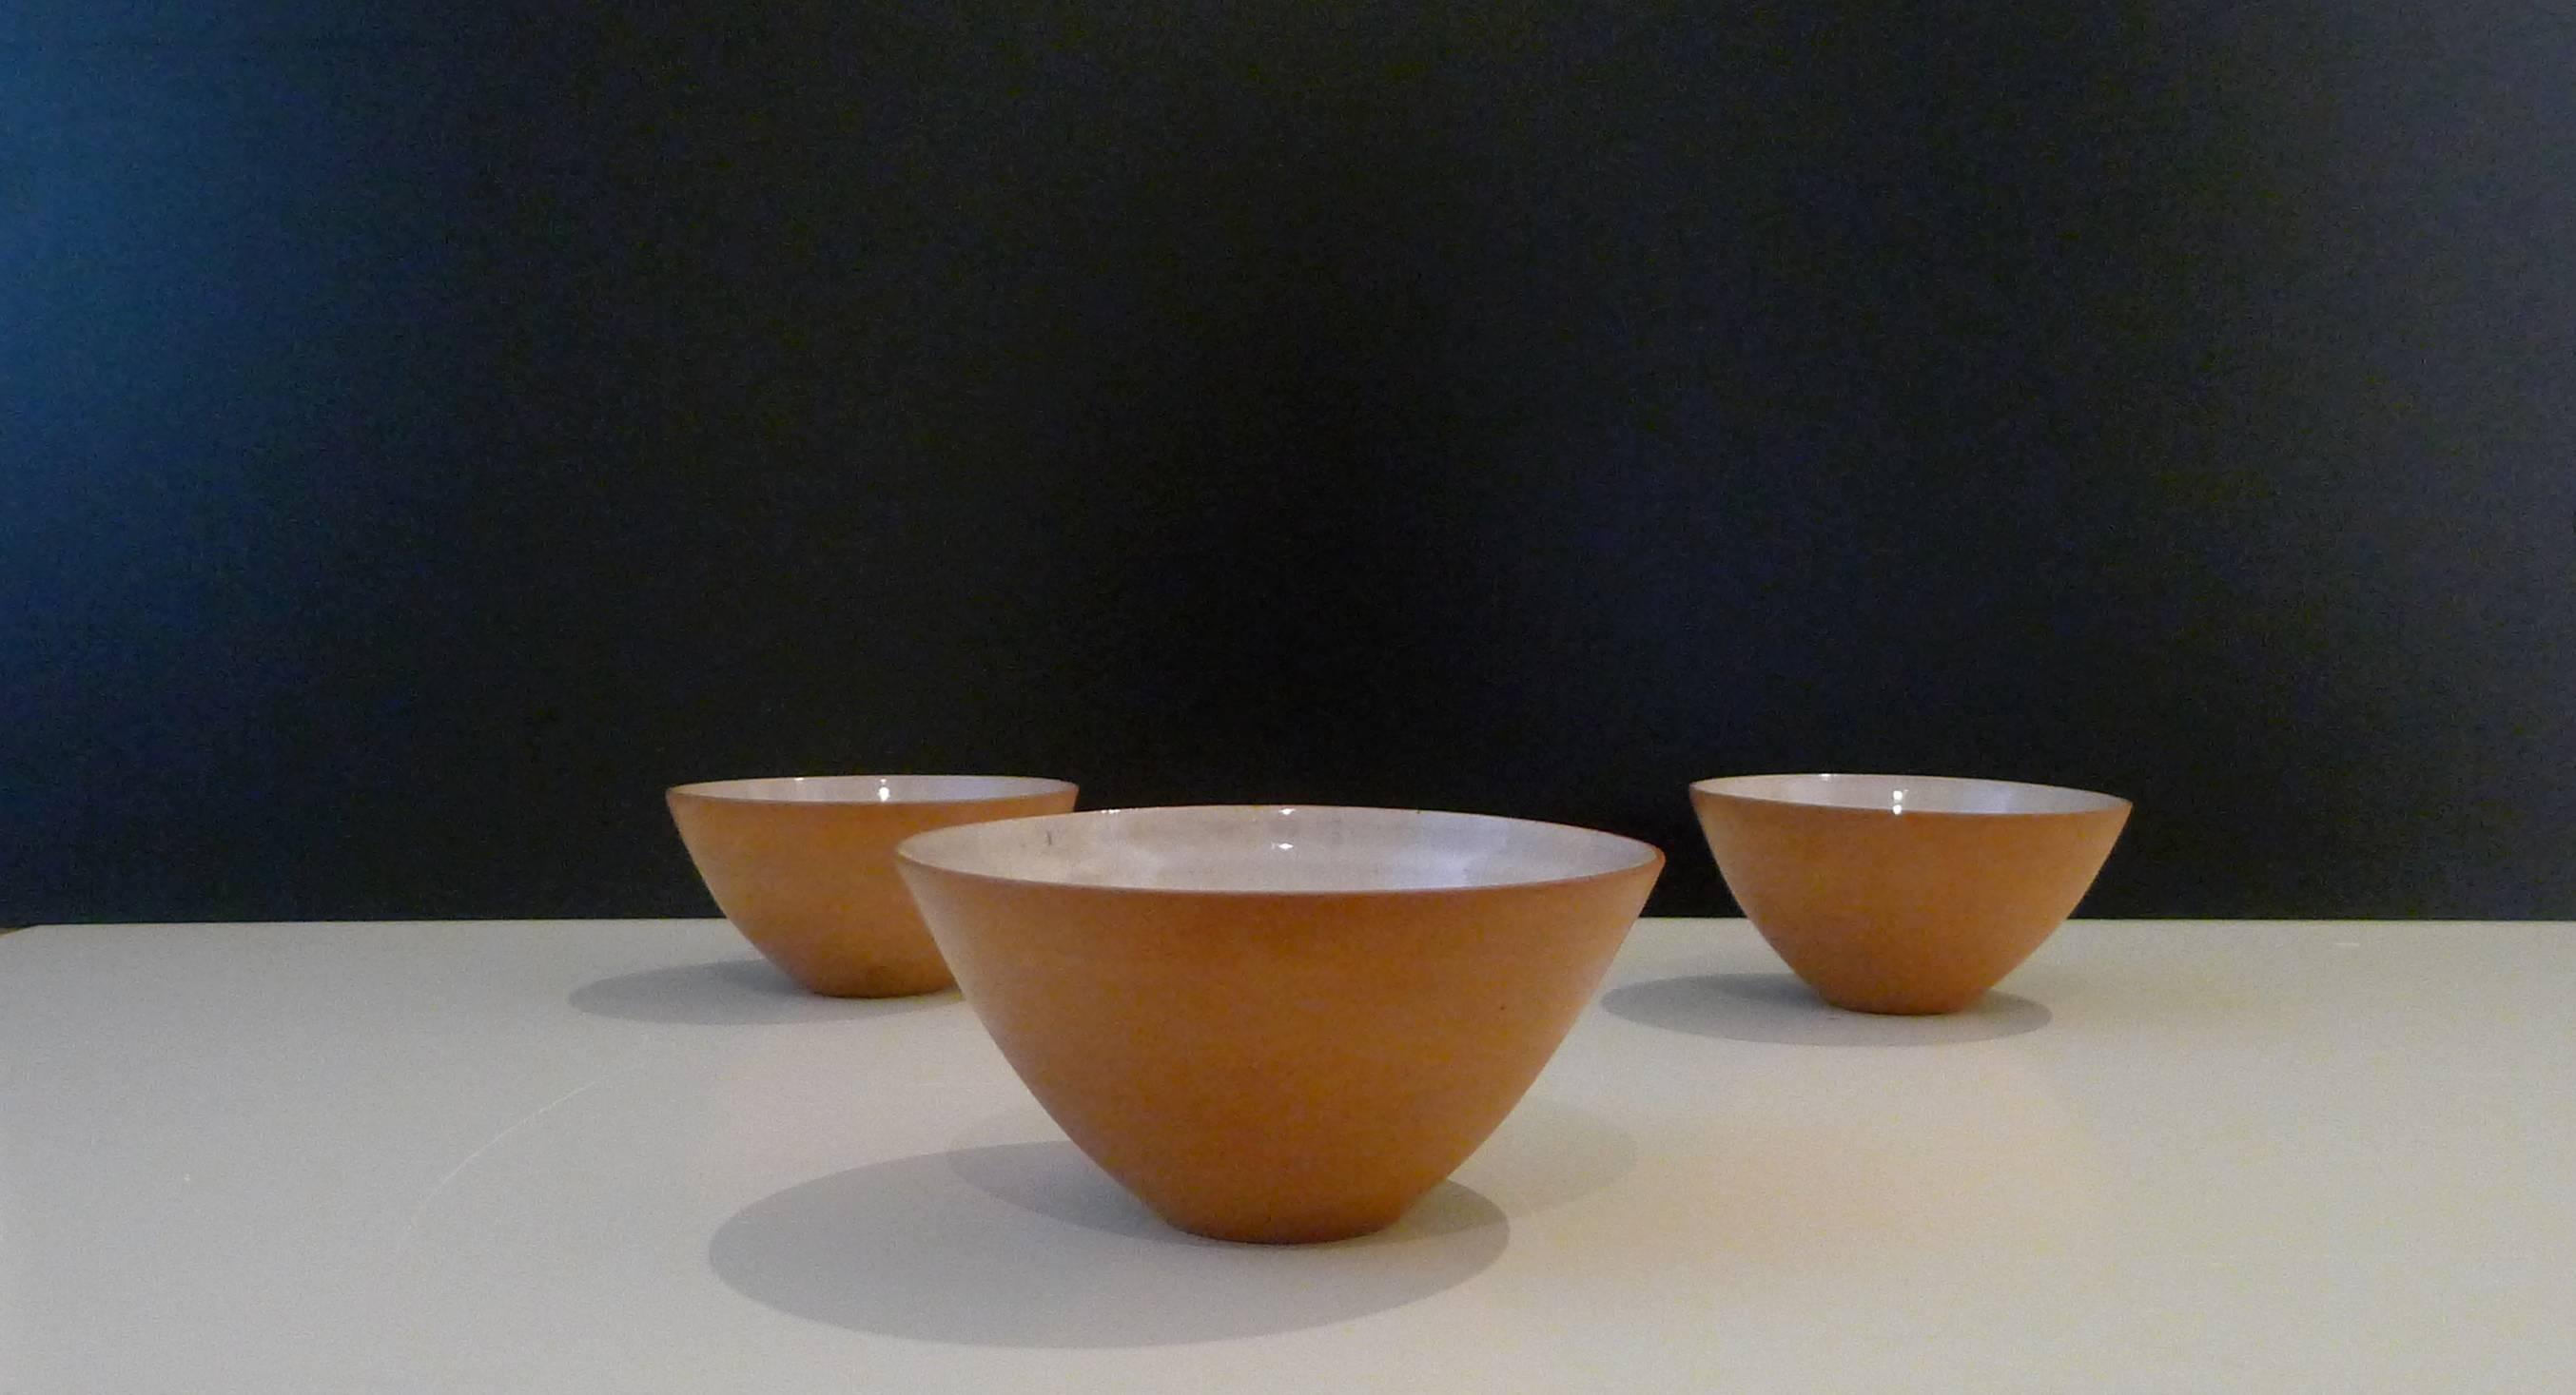 Lucie Rie, three earthenware bowls, circa 1949, very early examples of Rie's work as indicated by the chopmark signature on each vessel being on the exterior rather than the underside . 
Short firing crack to inside of largest